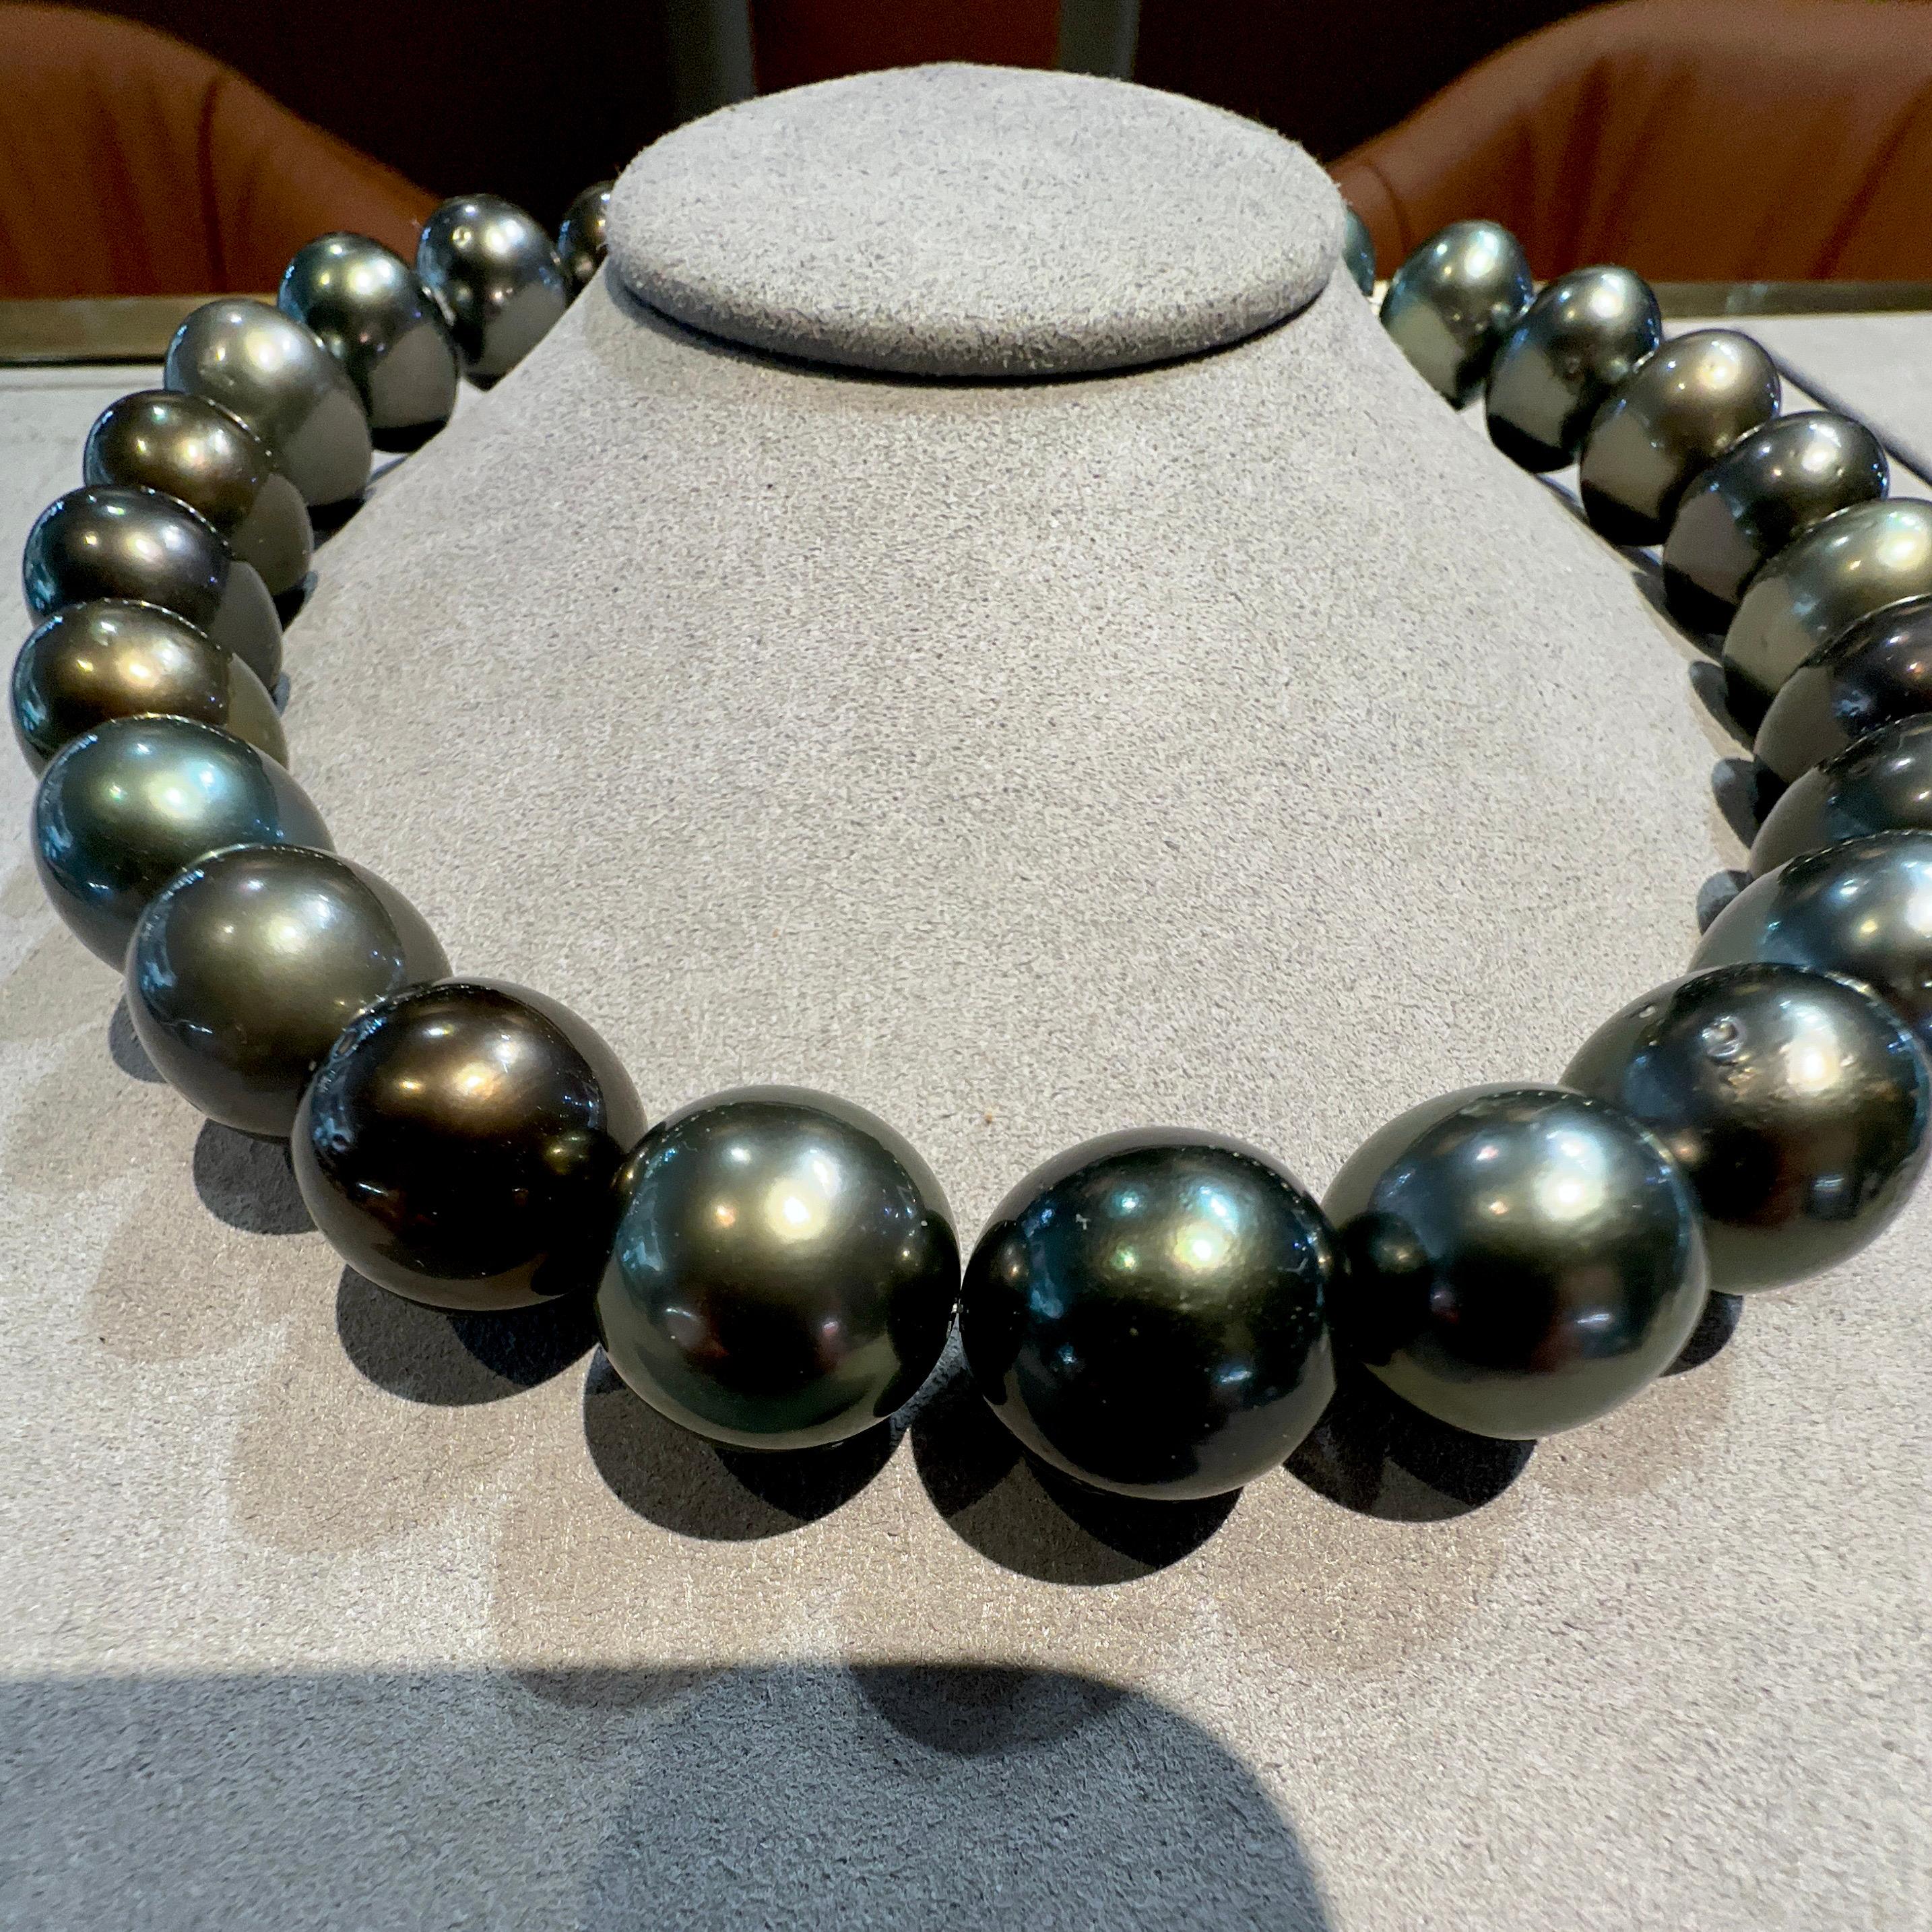 A Strand of black Colour Green tone Tahitian pearl necklace with 18K Gold Clasp. Green tone is very sought after in Tahitian pearls and therefore more valuable. 

A 14.5mm to 17 mm black Colour Green Tone Tahitian Pearl Necklace. It is a very deep